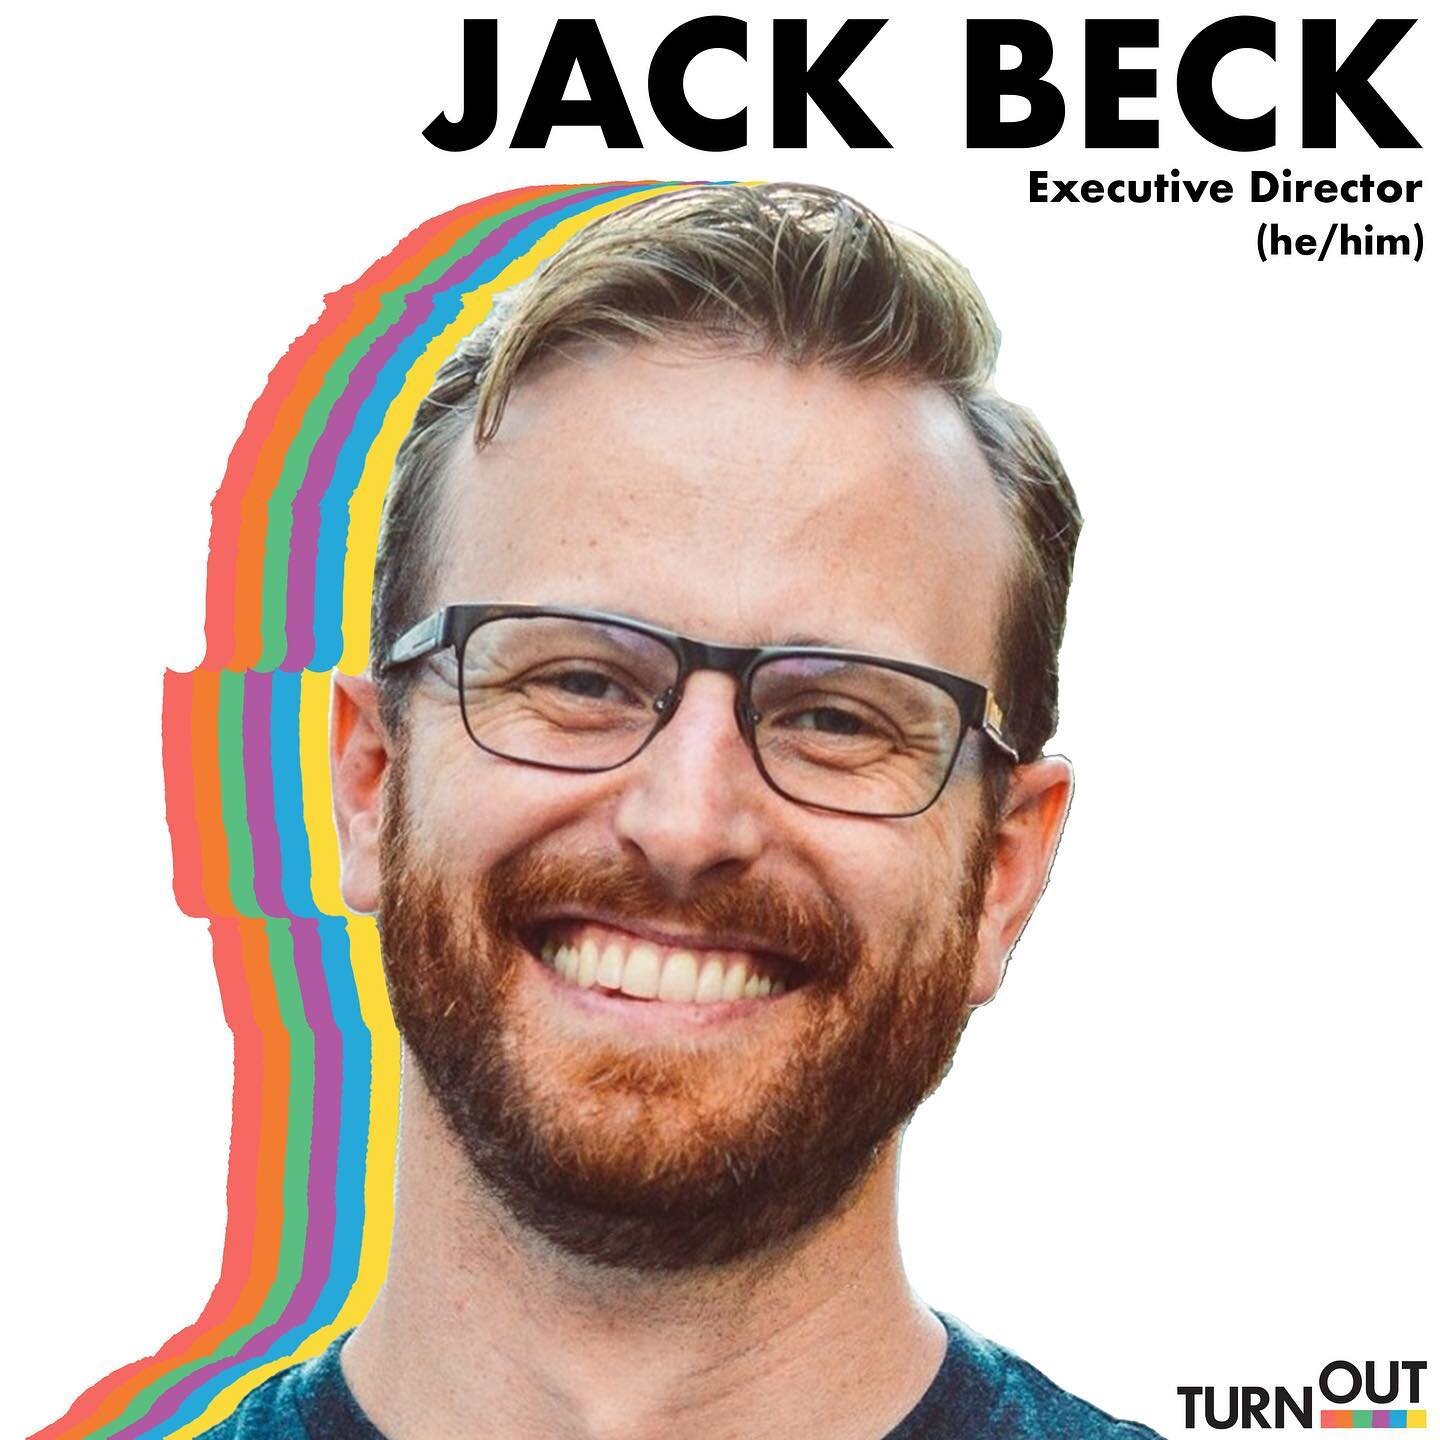 🌿Meet the Team🌿

Jack Beck (he/him) is our phenomenal Executive Director and the founder of TurnOut! He left his job in 2015 to start TurnOut and, since then, he has been working tirelessly to support and empower local queer and trans communities.
